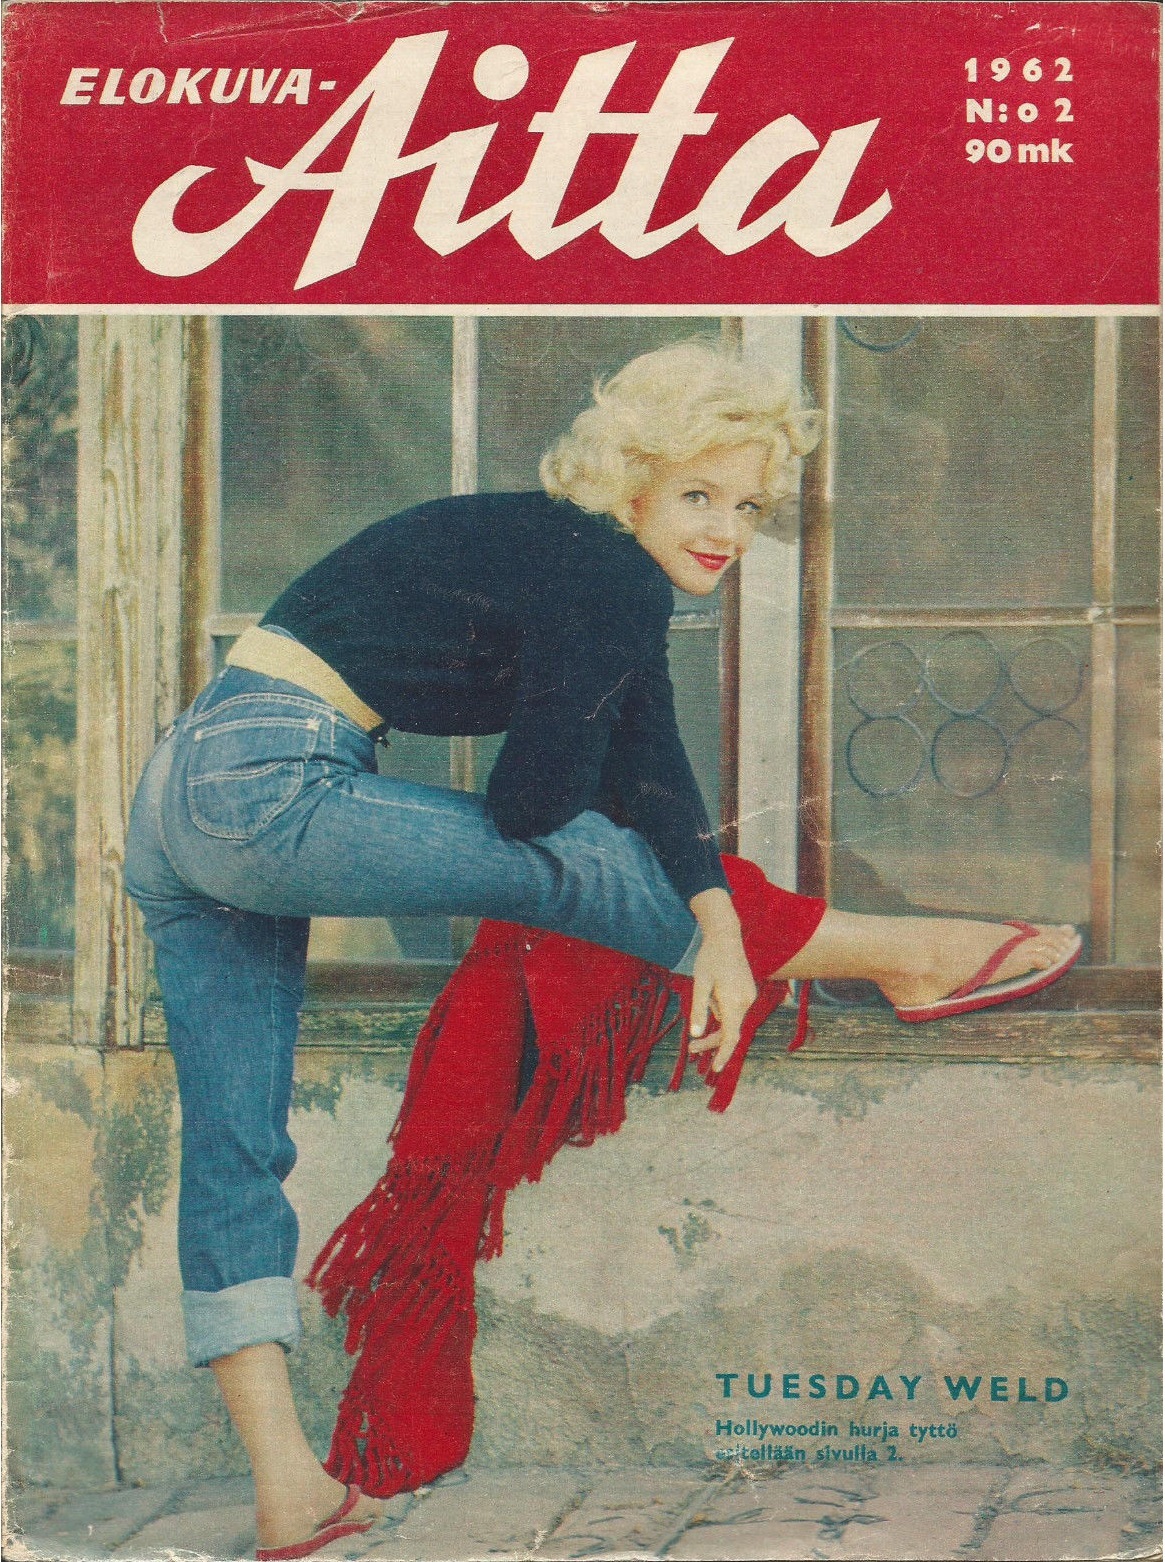 People who liked Tuesday Weld's feet, also liked.